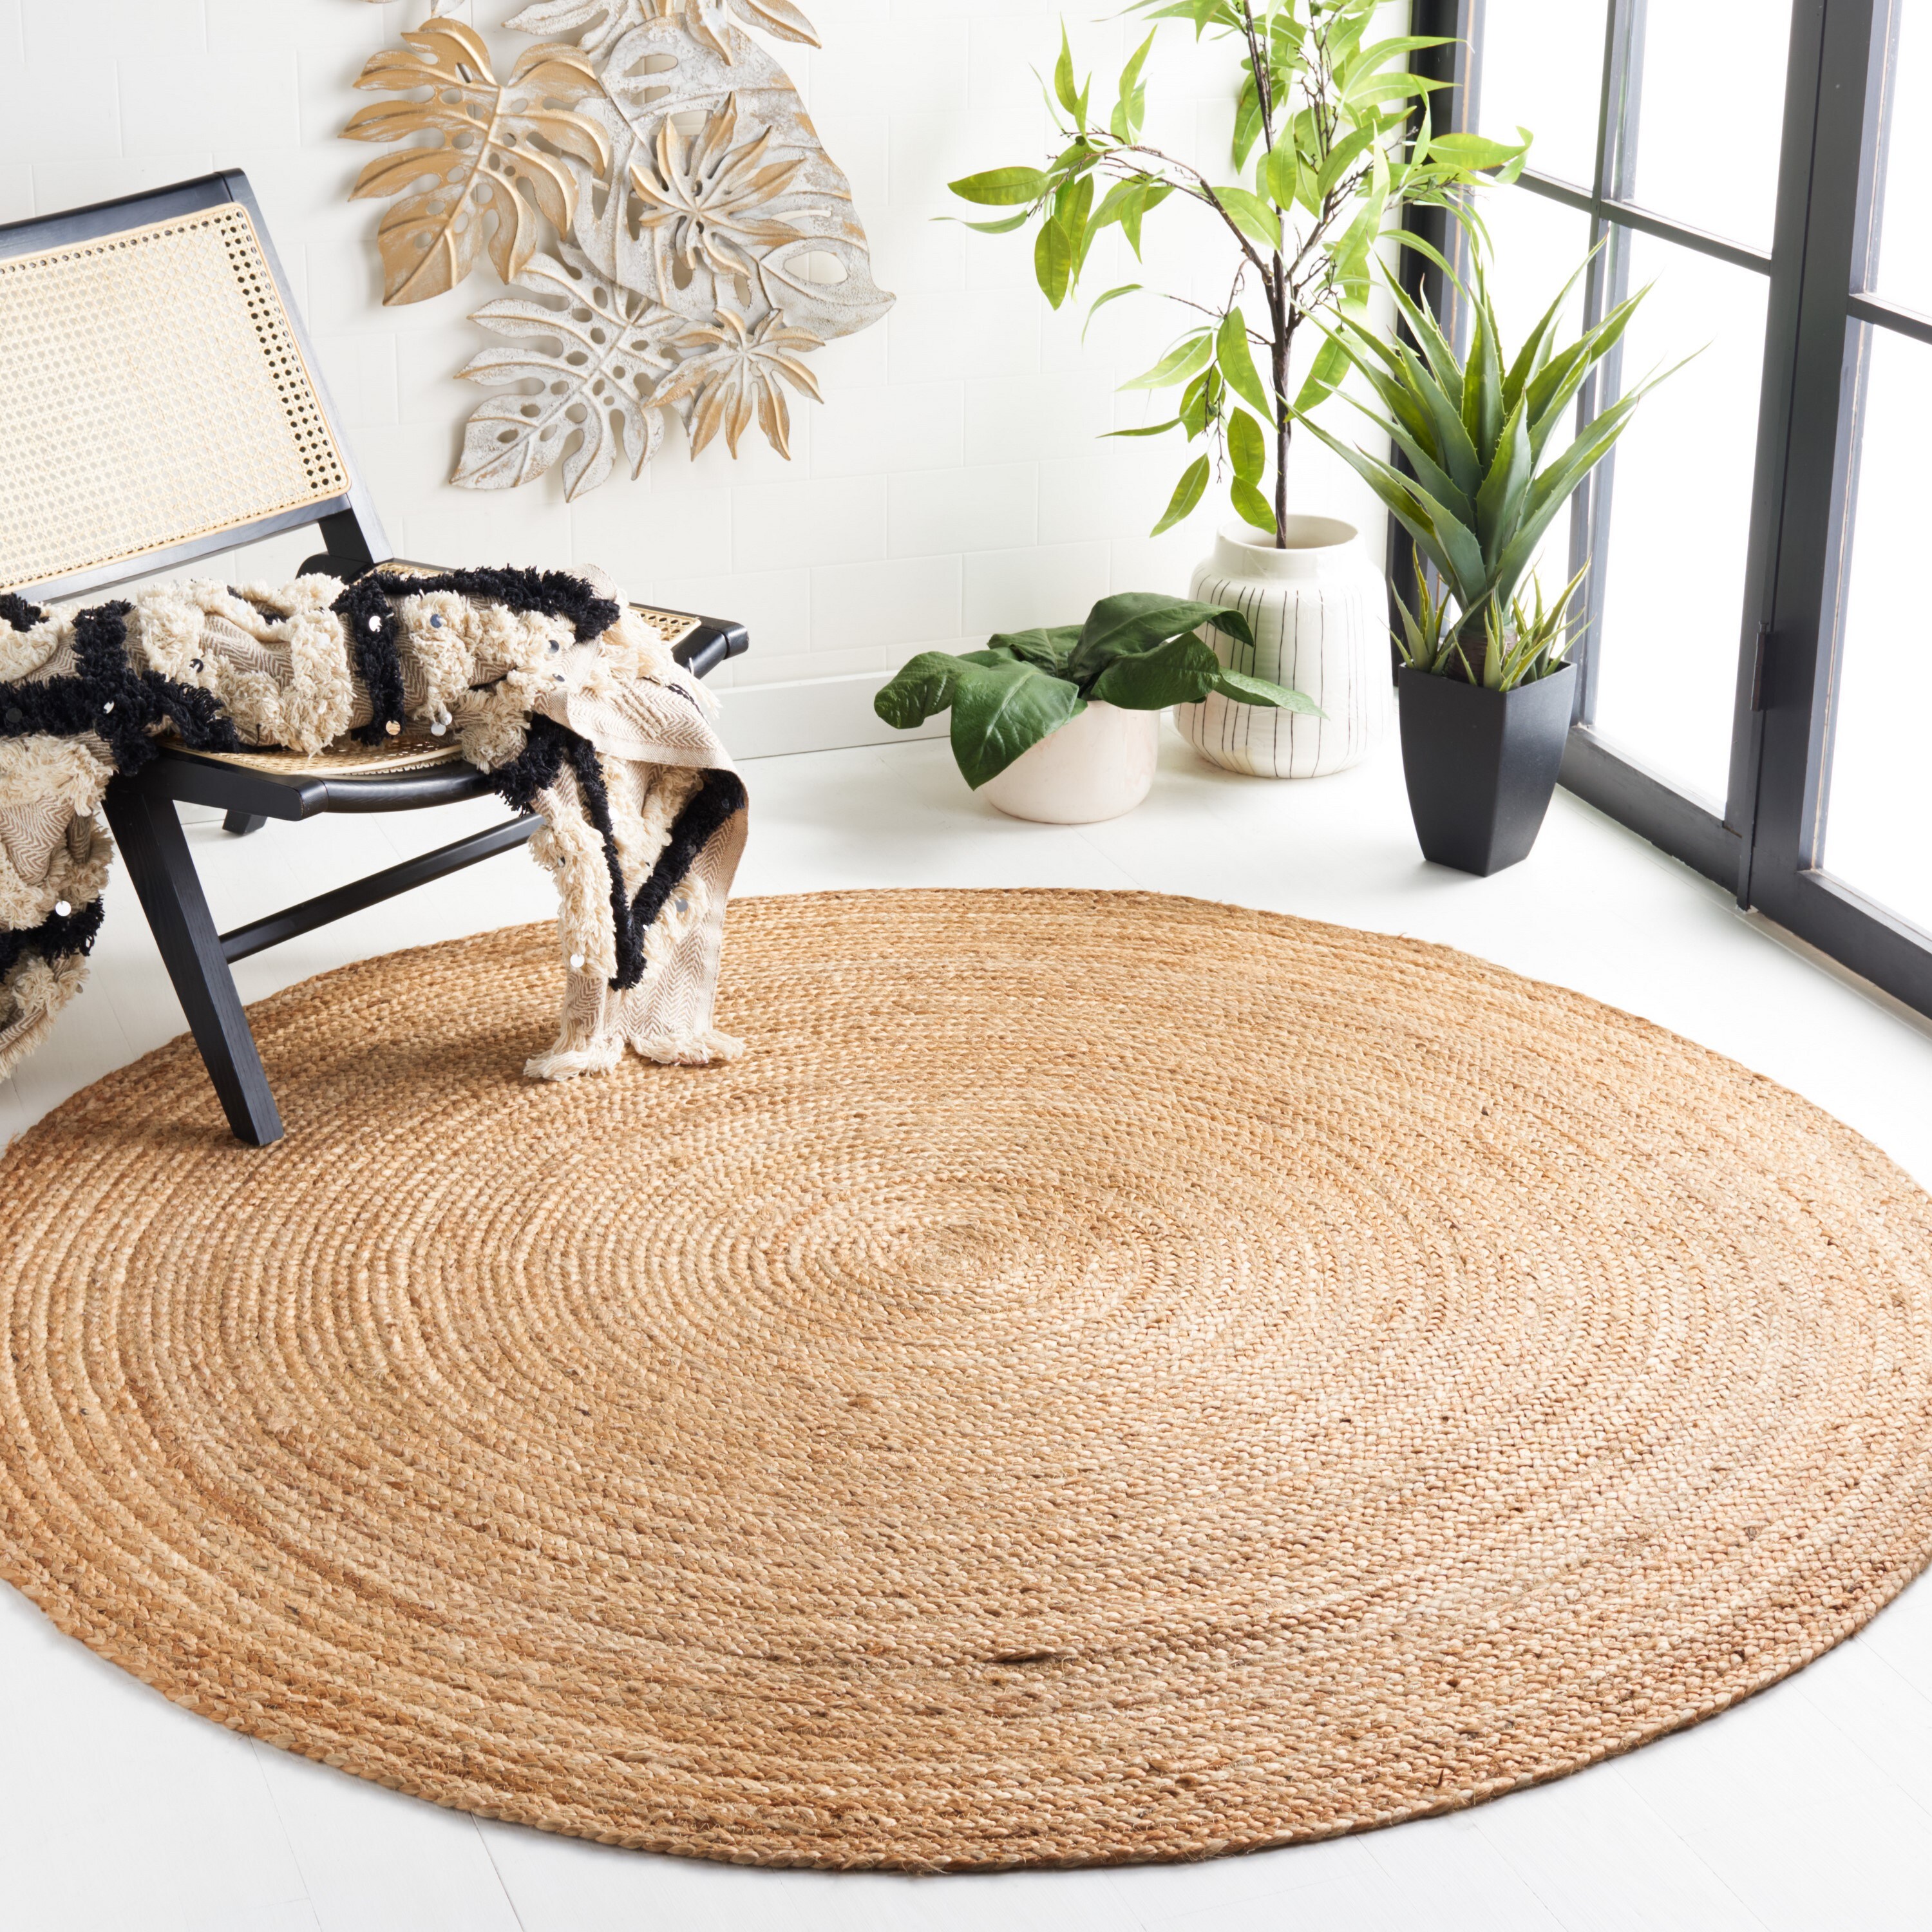 Jute Oval Rugs at